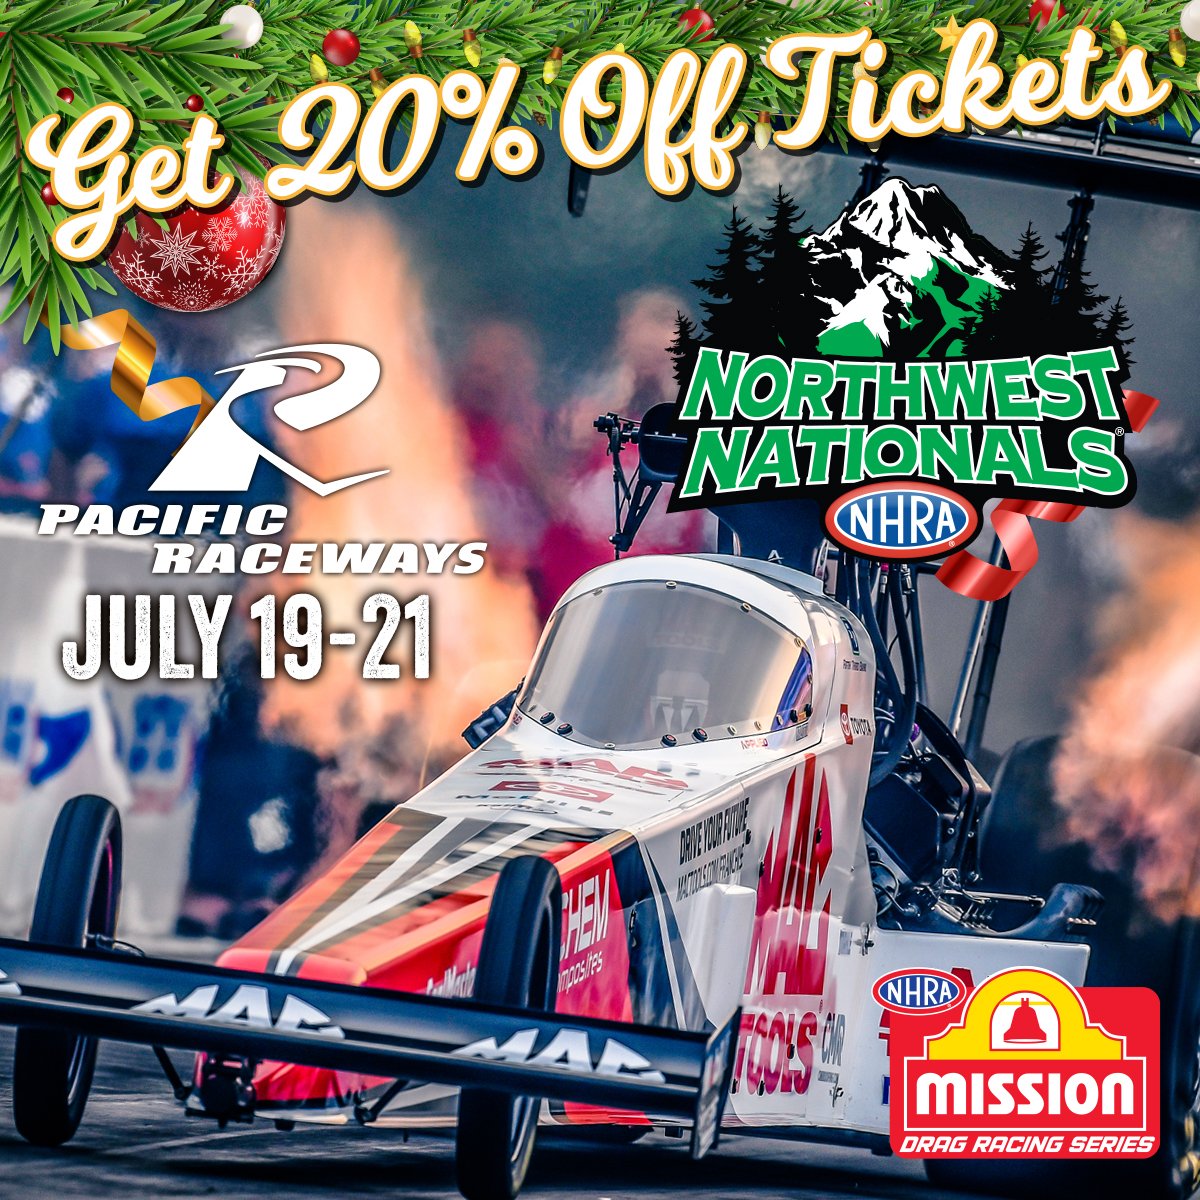 Save on 2024 @NHRA Northwest Nationals tickets thru 12/31/23. Discount applies to General Admission & Reserved Seats to @MissionFoodsUS Drag Racing event at #theplacetorace in July. Discount does not apply to Premium Grandstand seating or hospitality. nhra.evenue.net/cgi-bin/ncomme…